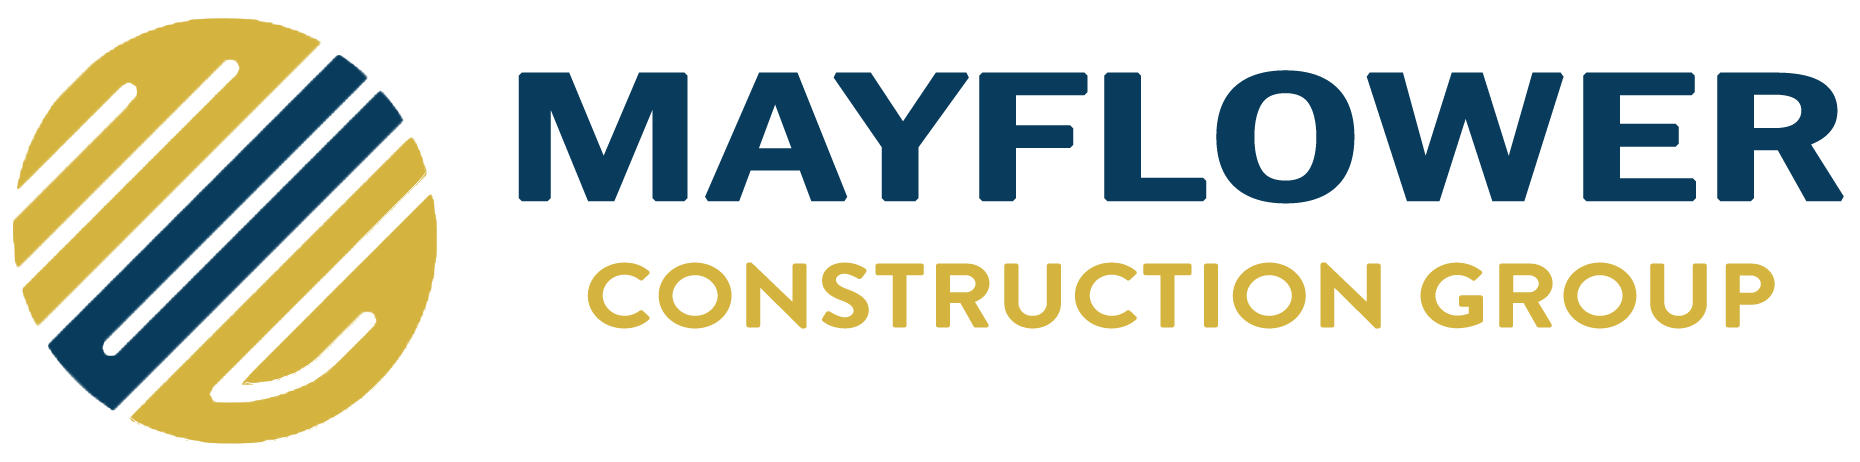 Mayflower Construction Group Highlights What Clients Should Expect During a Remodeling Project